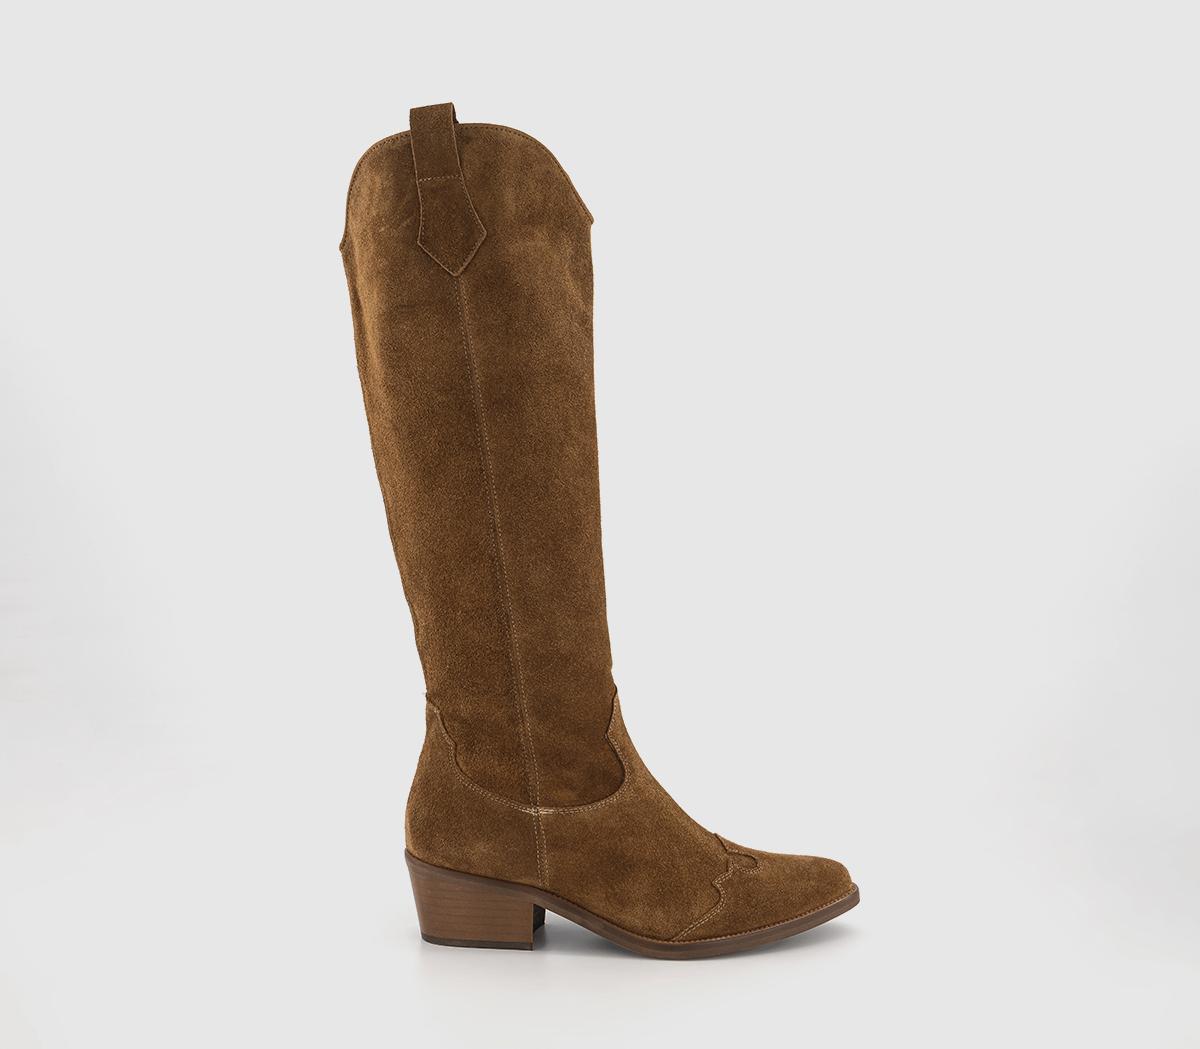 OFFICE Kezia Heeled Western Knee Boots Tan Suede - Knee High Boots